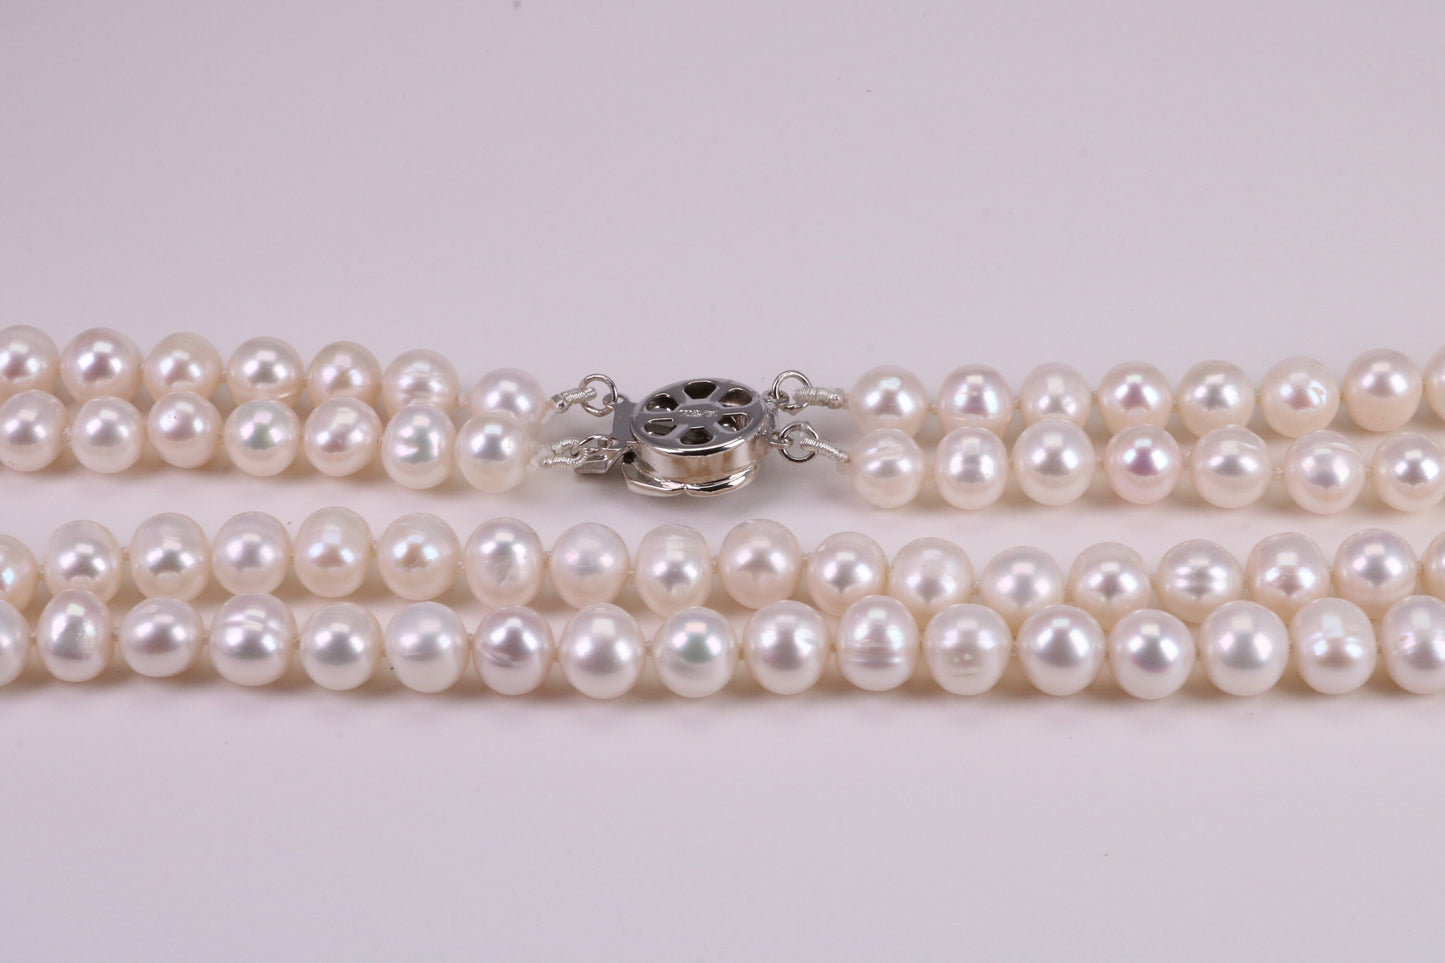 Two Strand Natural 8 mm Round Pearl Necklace set in Silver, Two Strands Measures 18 and 20 inches Long